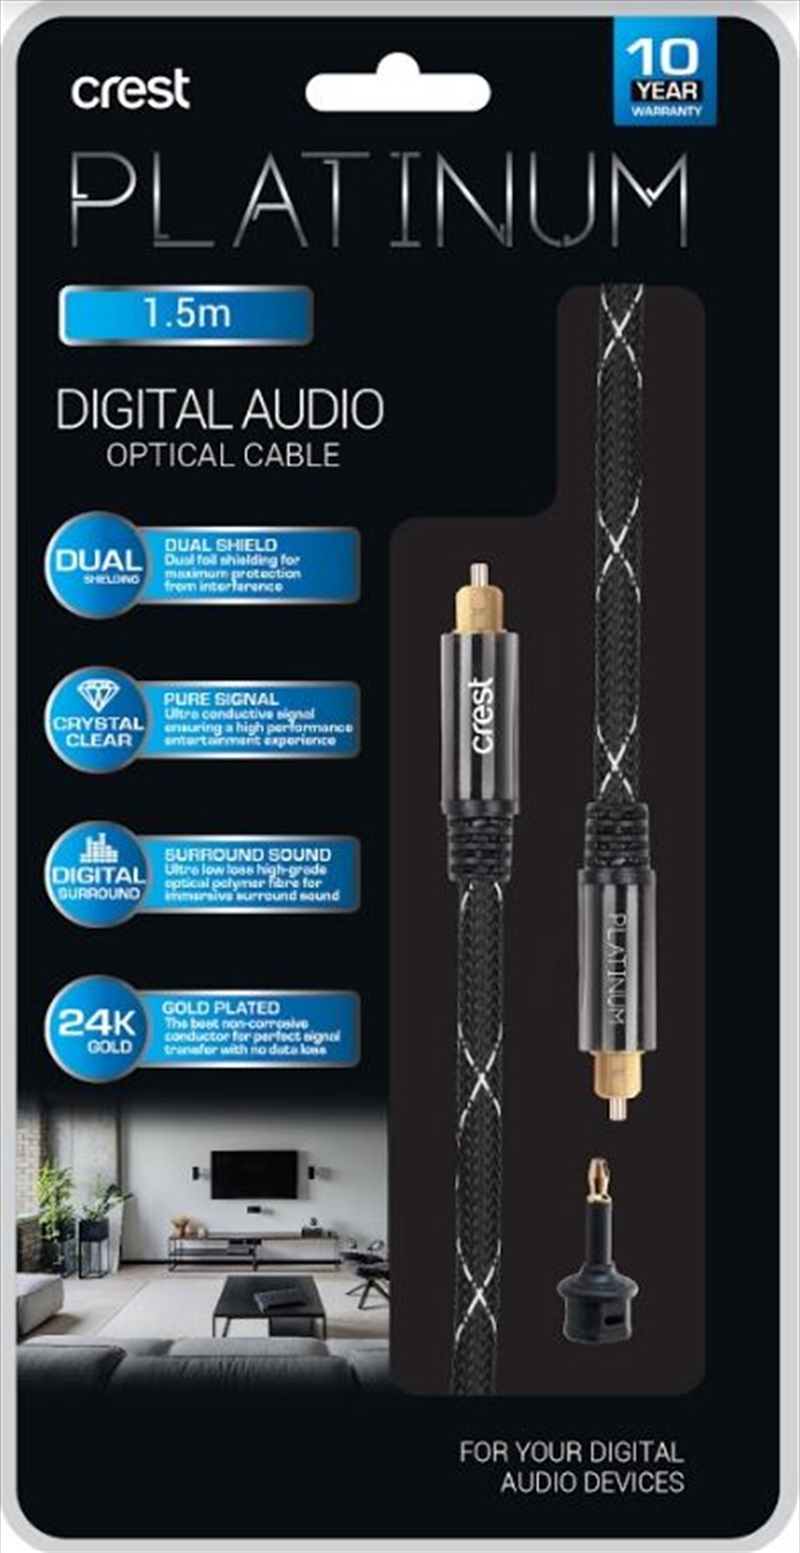 Digital Audio Optical Cable - 1.5M/Product Detail/Cables